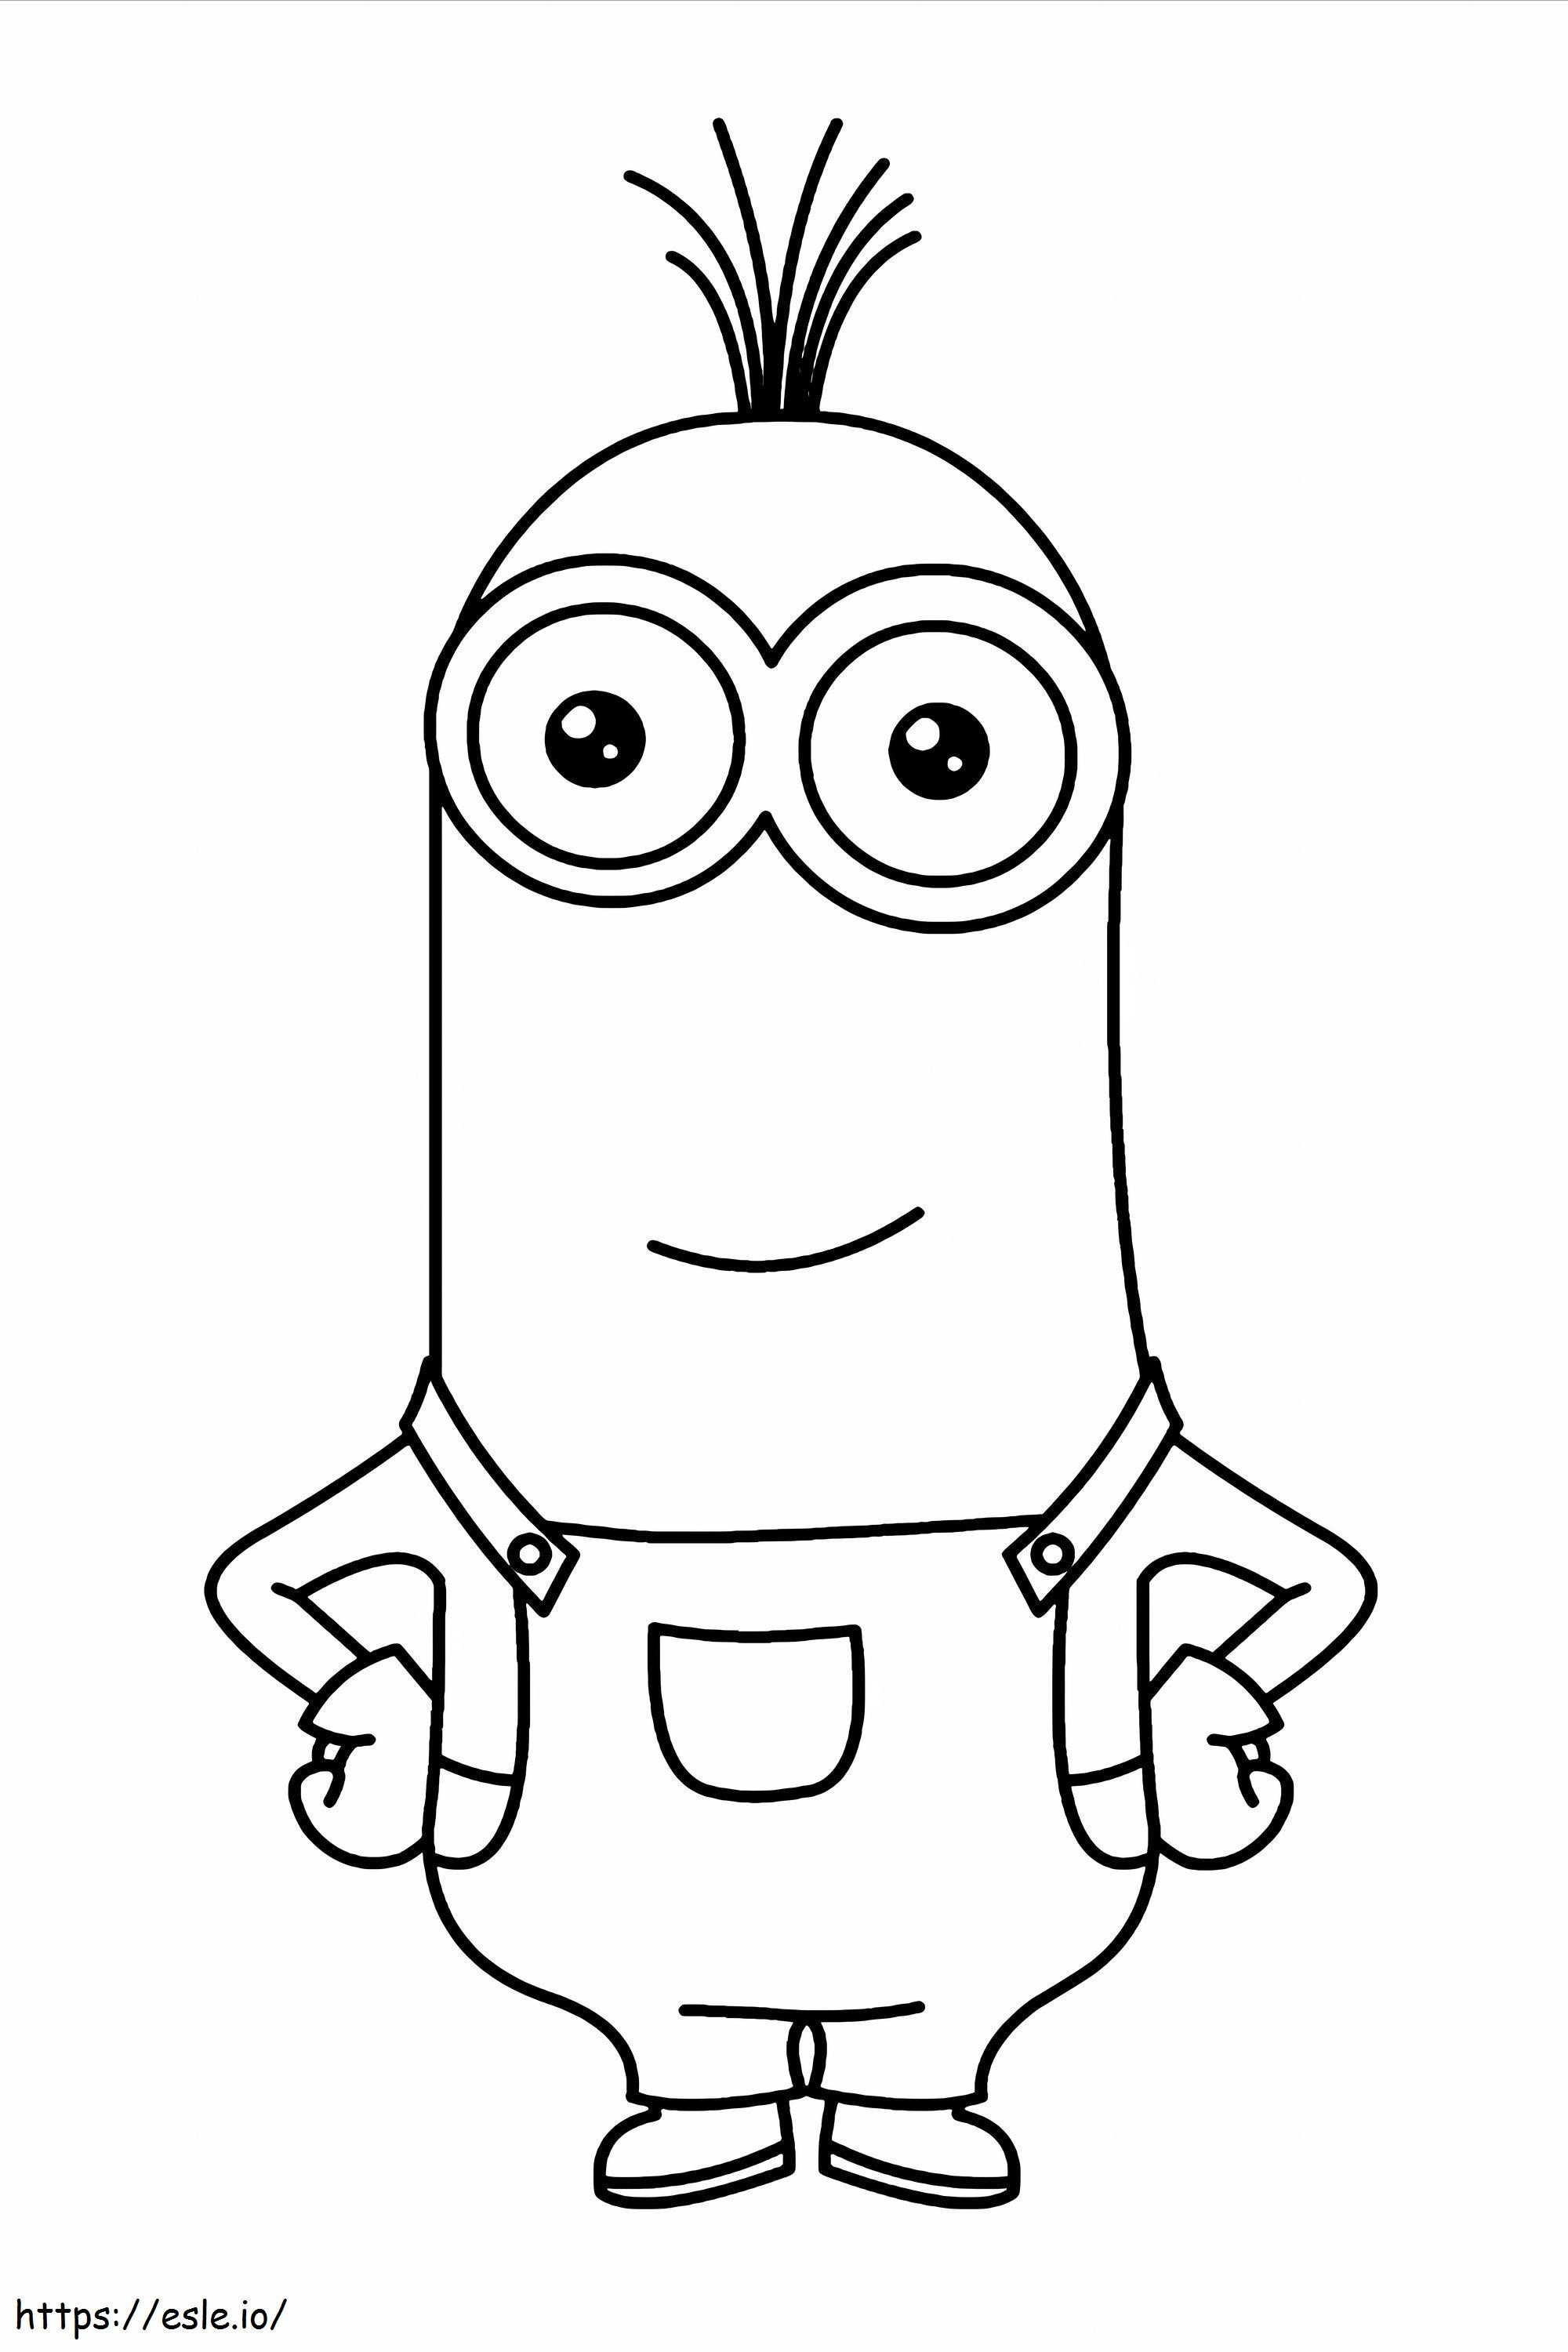 Minion Smiling coloring page